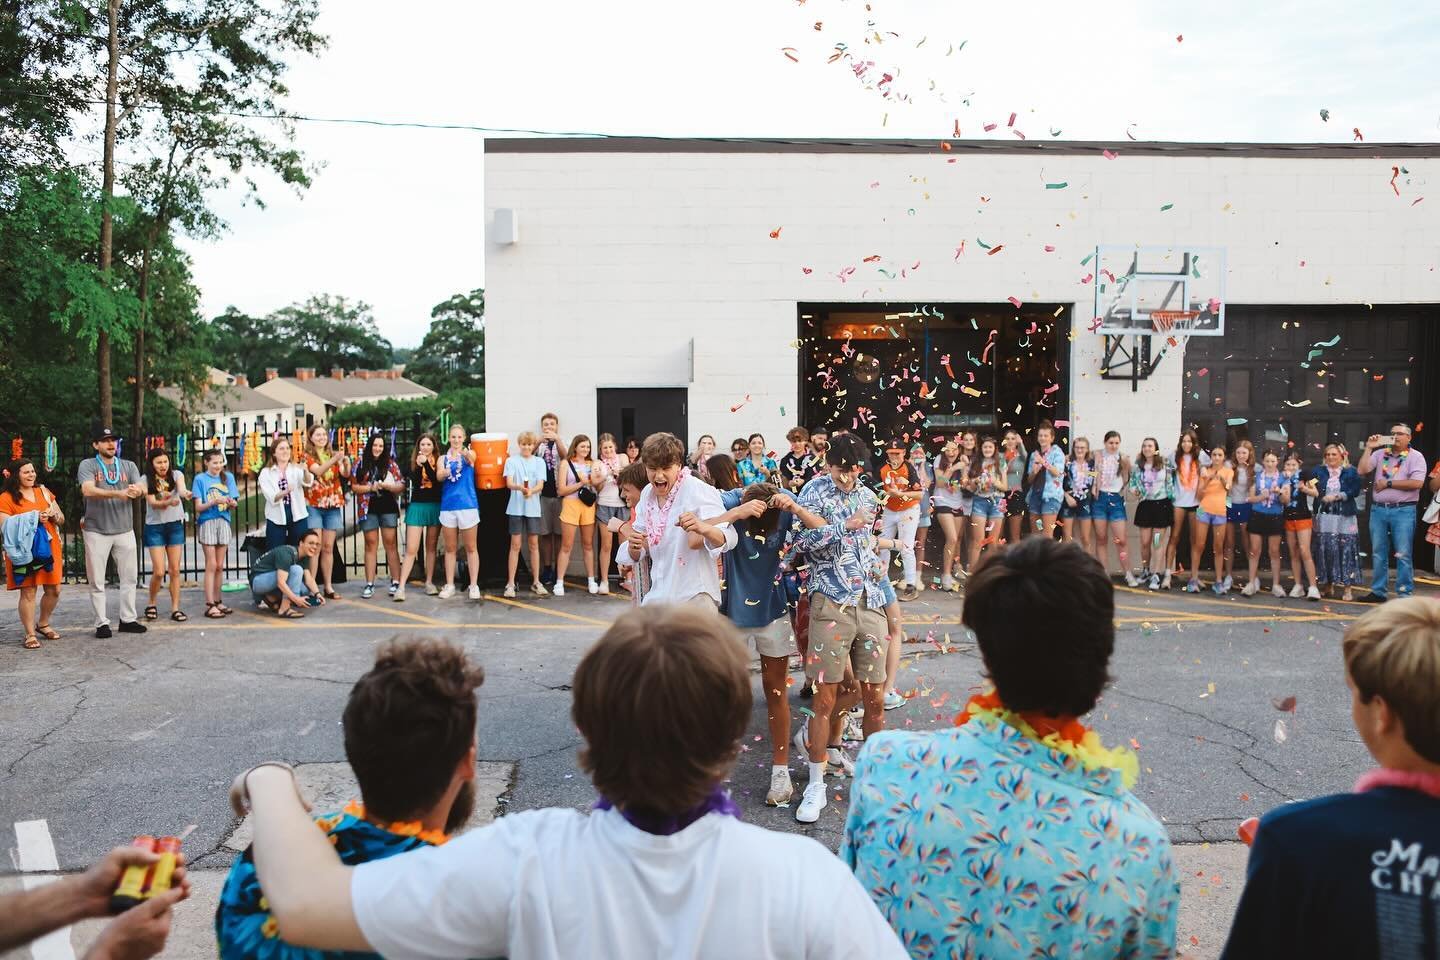 🎉 Senior Send-off Success! Class of 2024&hellip; we love you! 🧡 You&rsquo;ll always have a home here at 165 Pulaski. 

📸: @ich_bin_ike